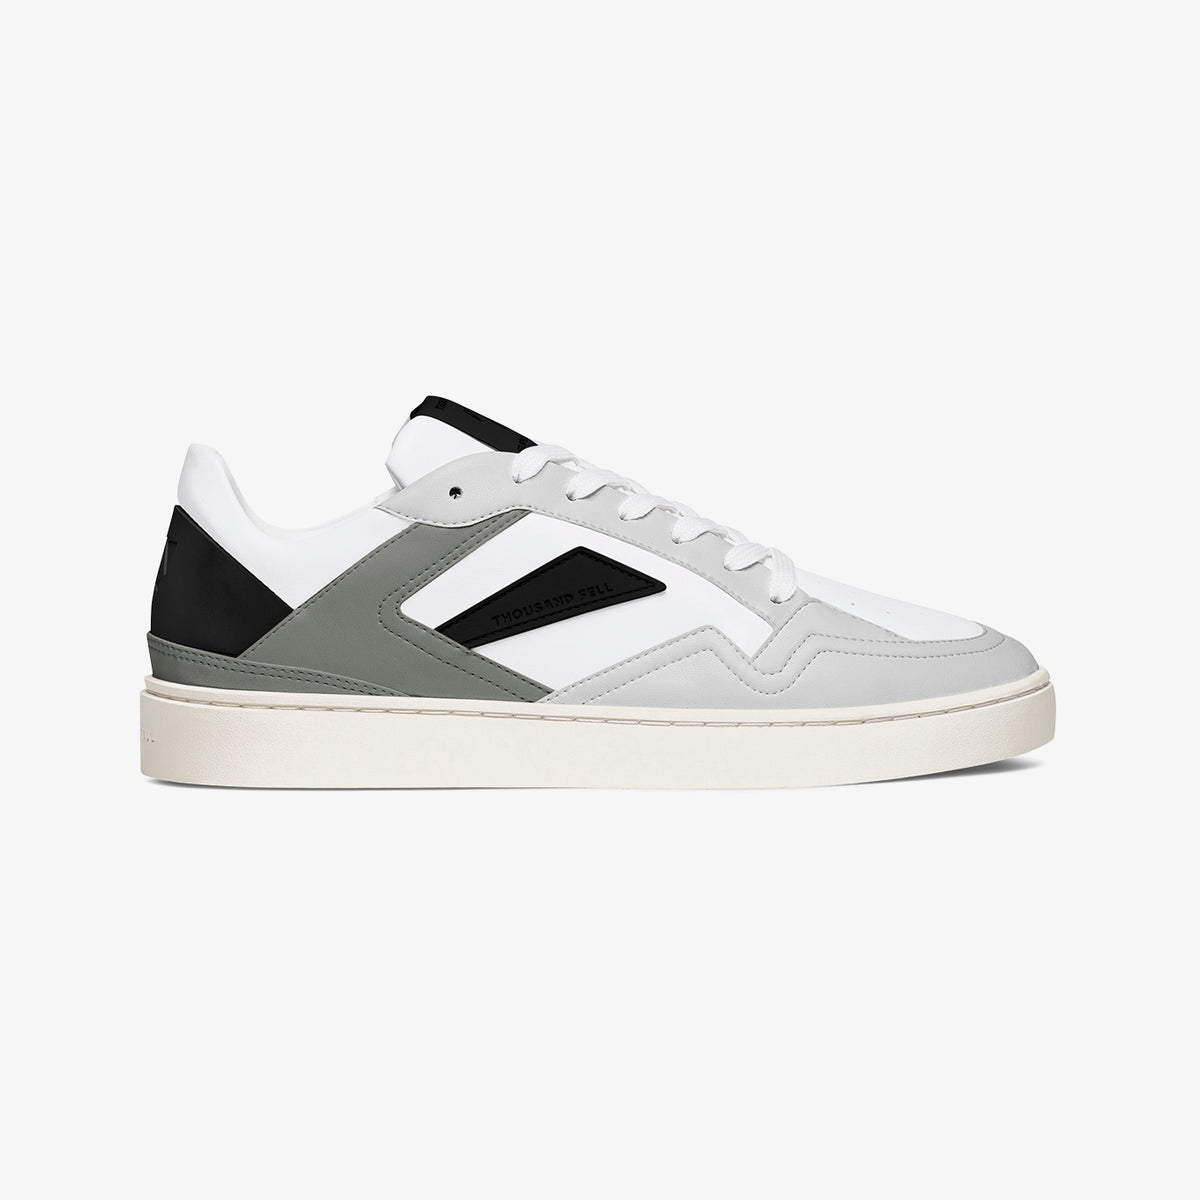 Women's Court in Retro Grey-Black | Stain-Proof & Sustainable ...